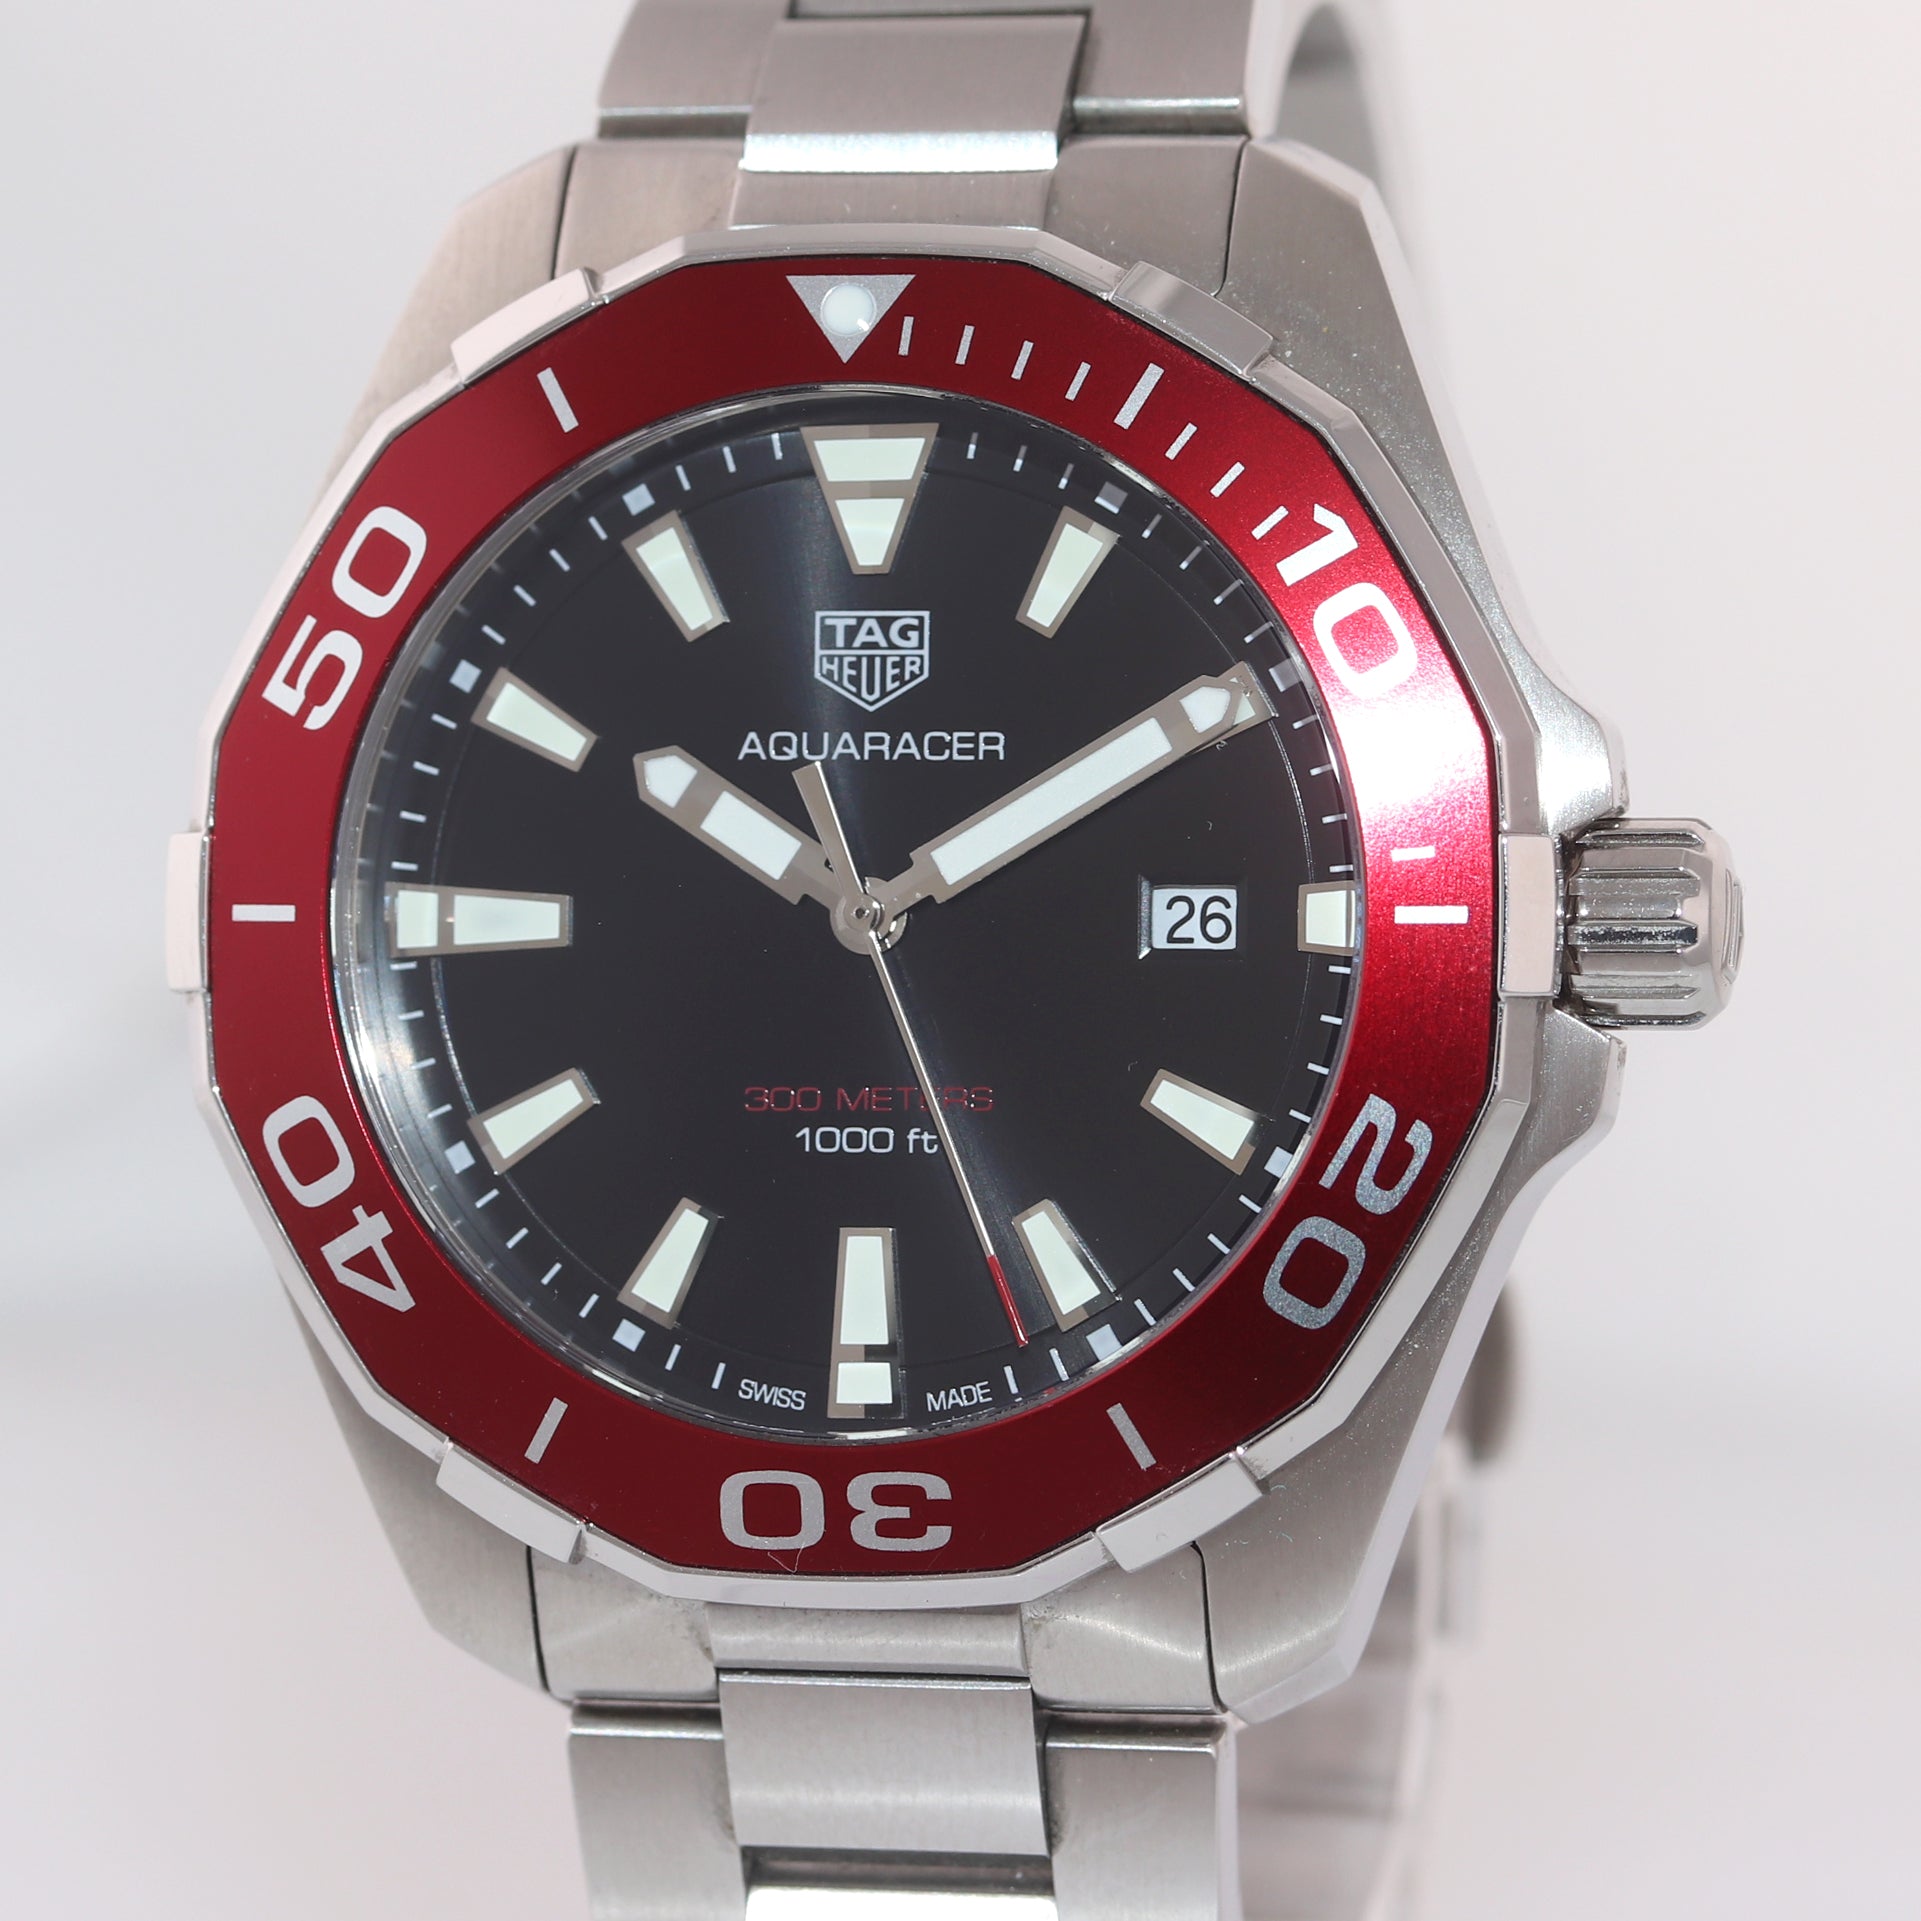 Tag Heuer Aquaracer Diver Black Dial Red Bezel Stainless Steel WAY101B.BA0746